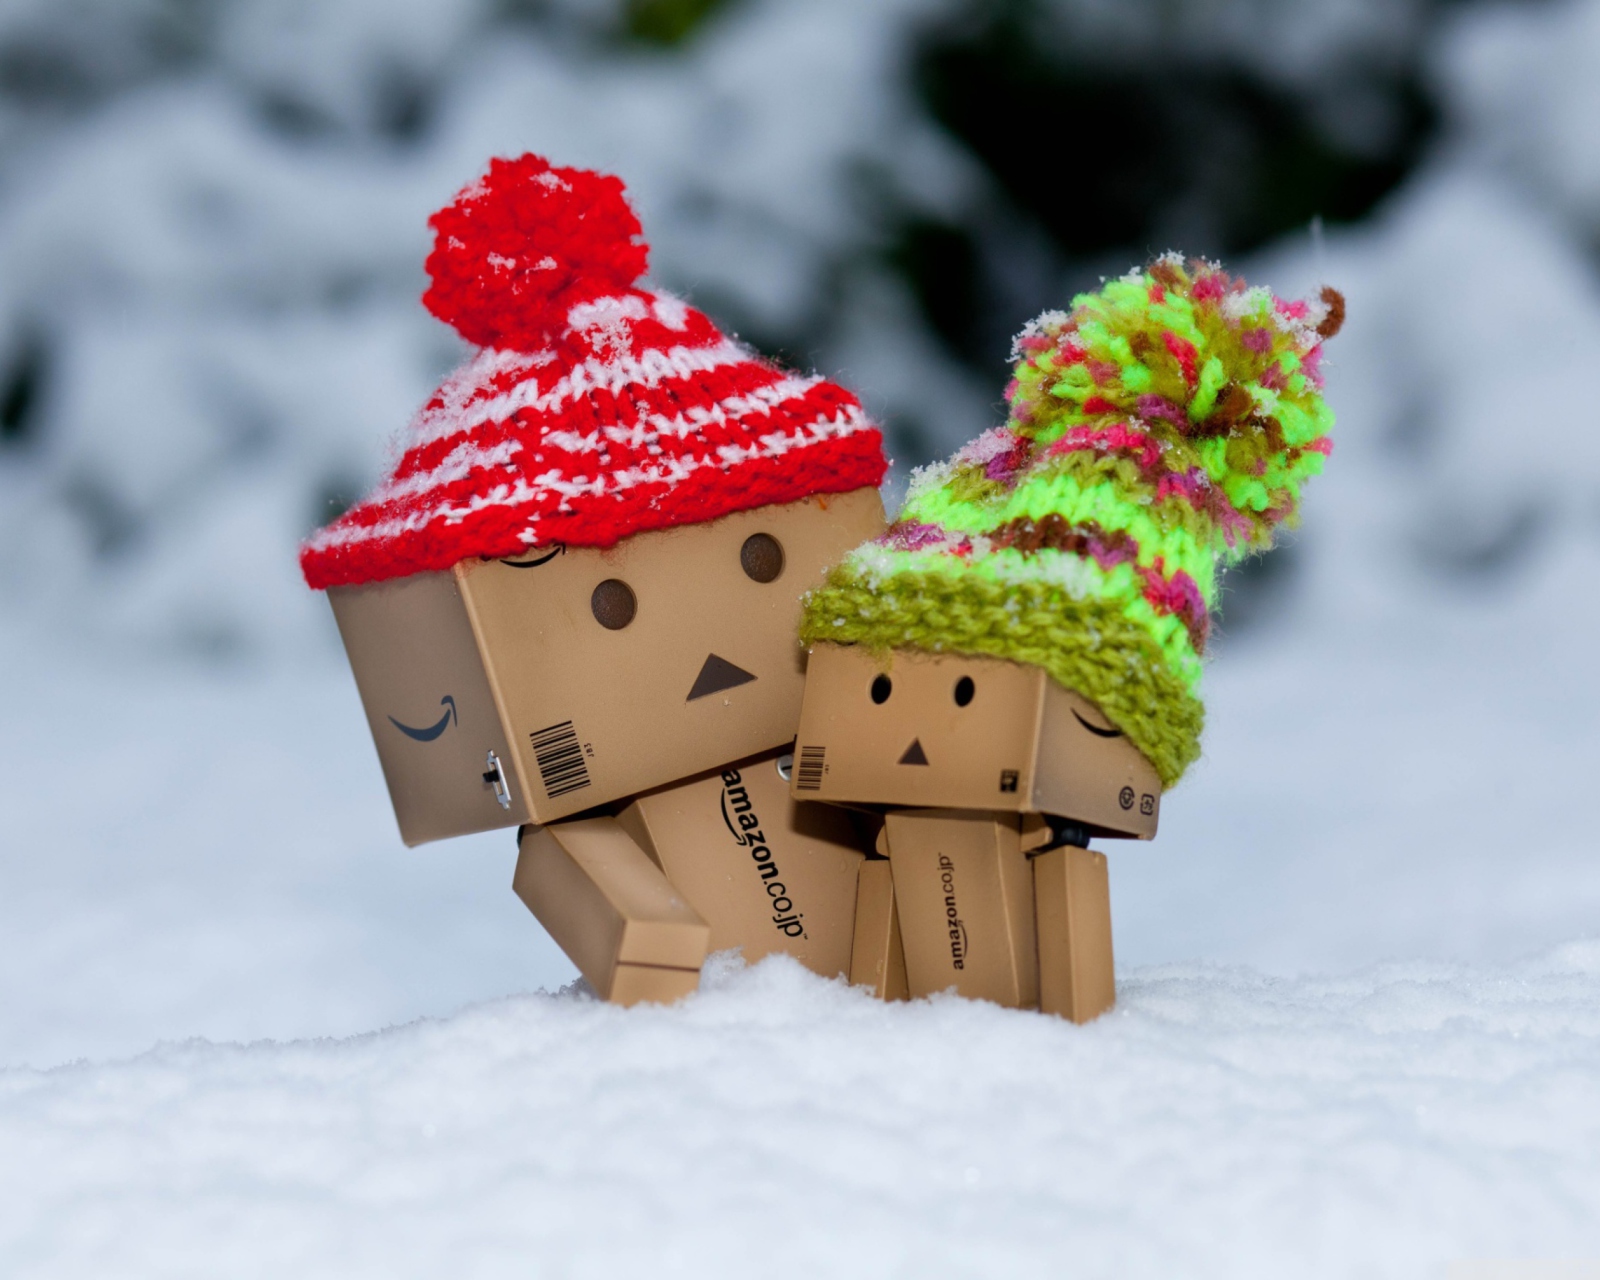 Danbo Is Scared By So Much Snow wallpaper 1600x1280